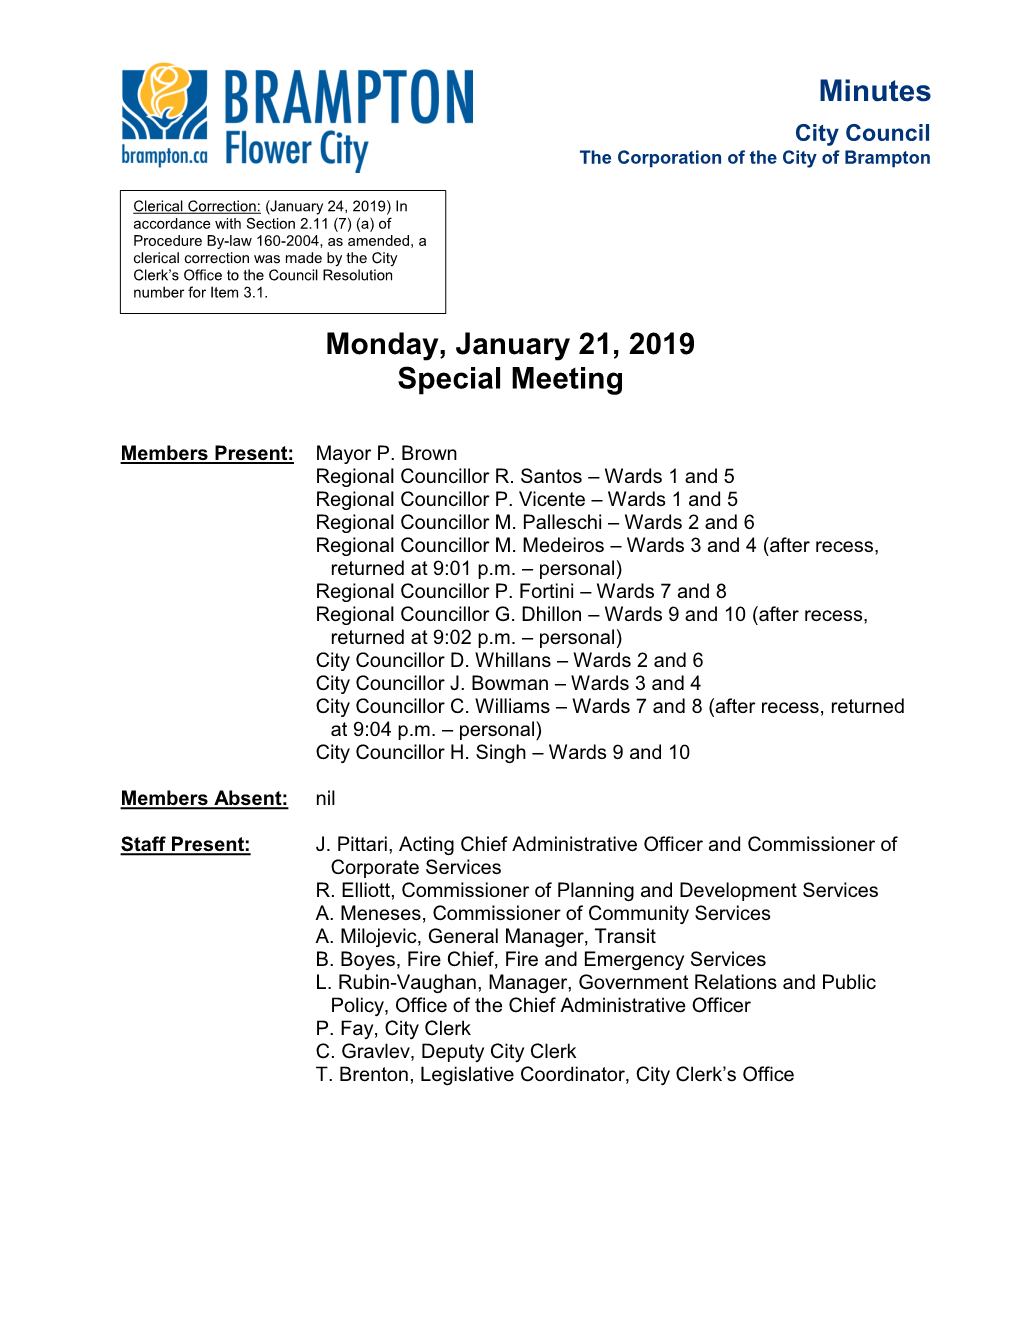 Special Council Minutes for January 23, 2019